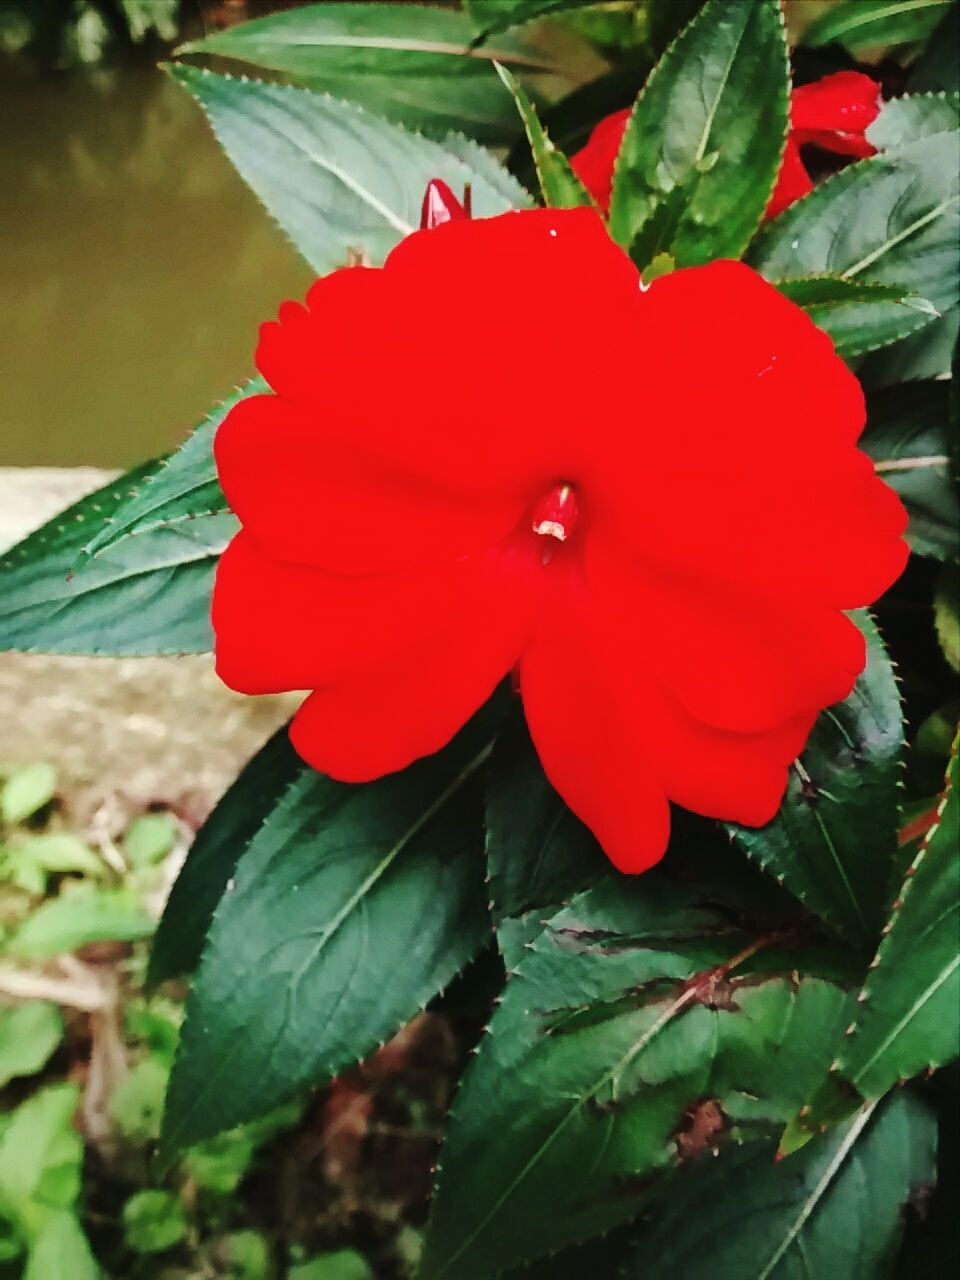 red, leaf, flower, growth, petal, freshness, plant, close-up, flower head, beauty in nature, focus on foreground, fragility, nature, single flower, blooming, green color, day, outdoors, sunlight, no people